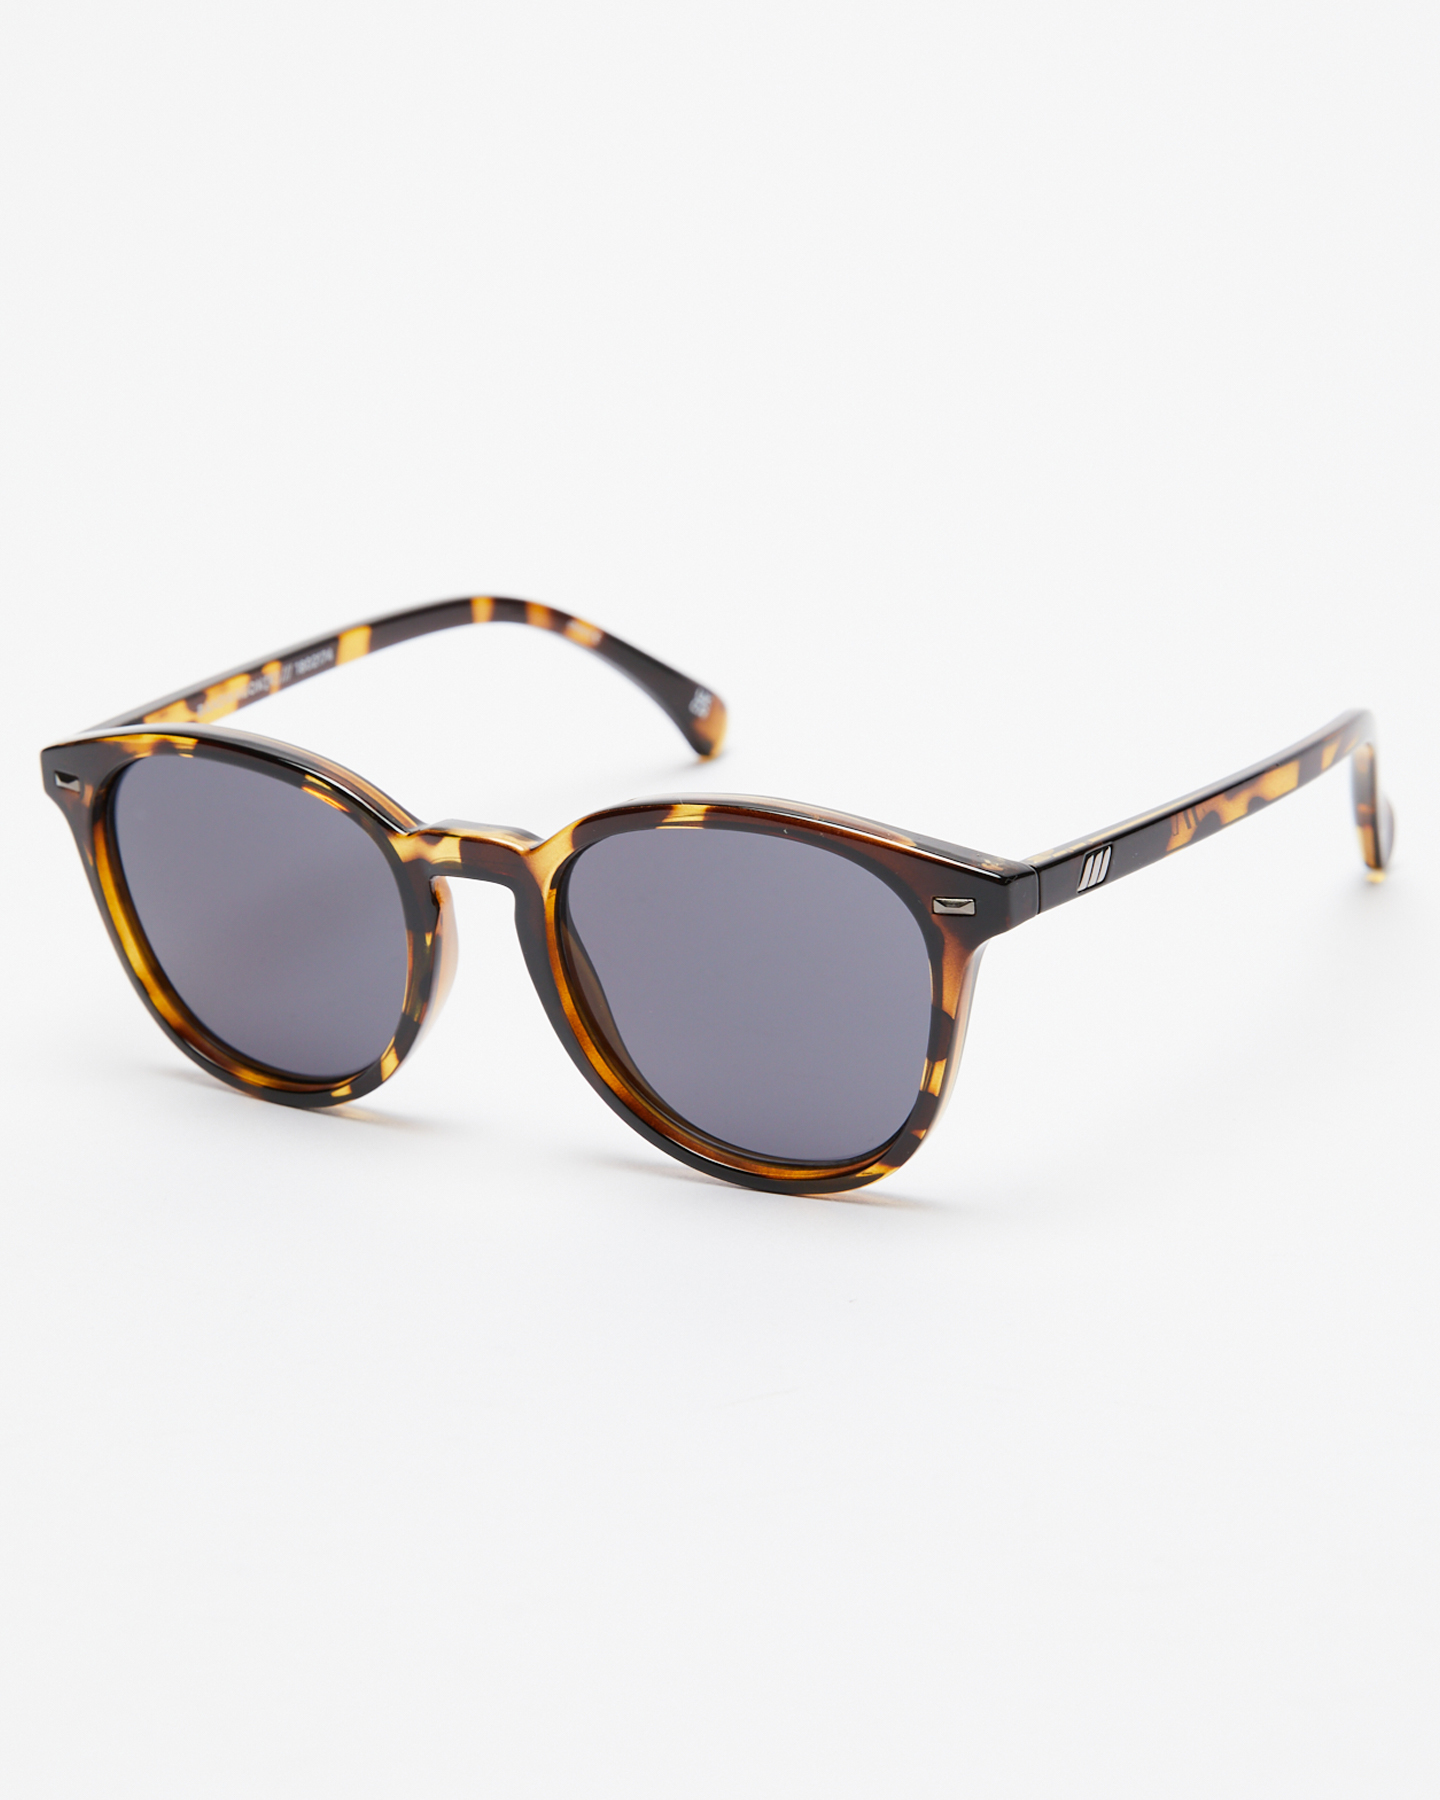 Le Specs Bandwagon Sunglasses - Syrup Tort | SurfStitch